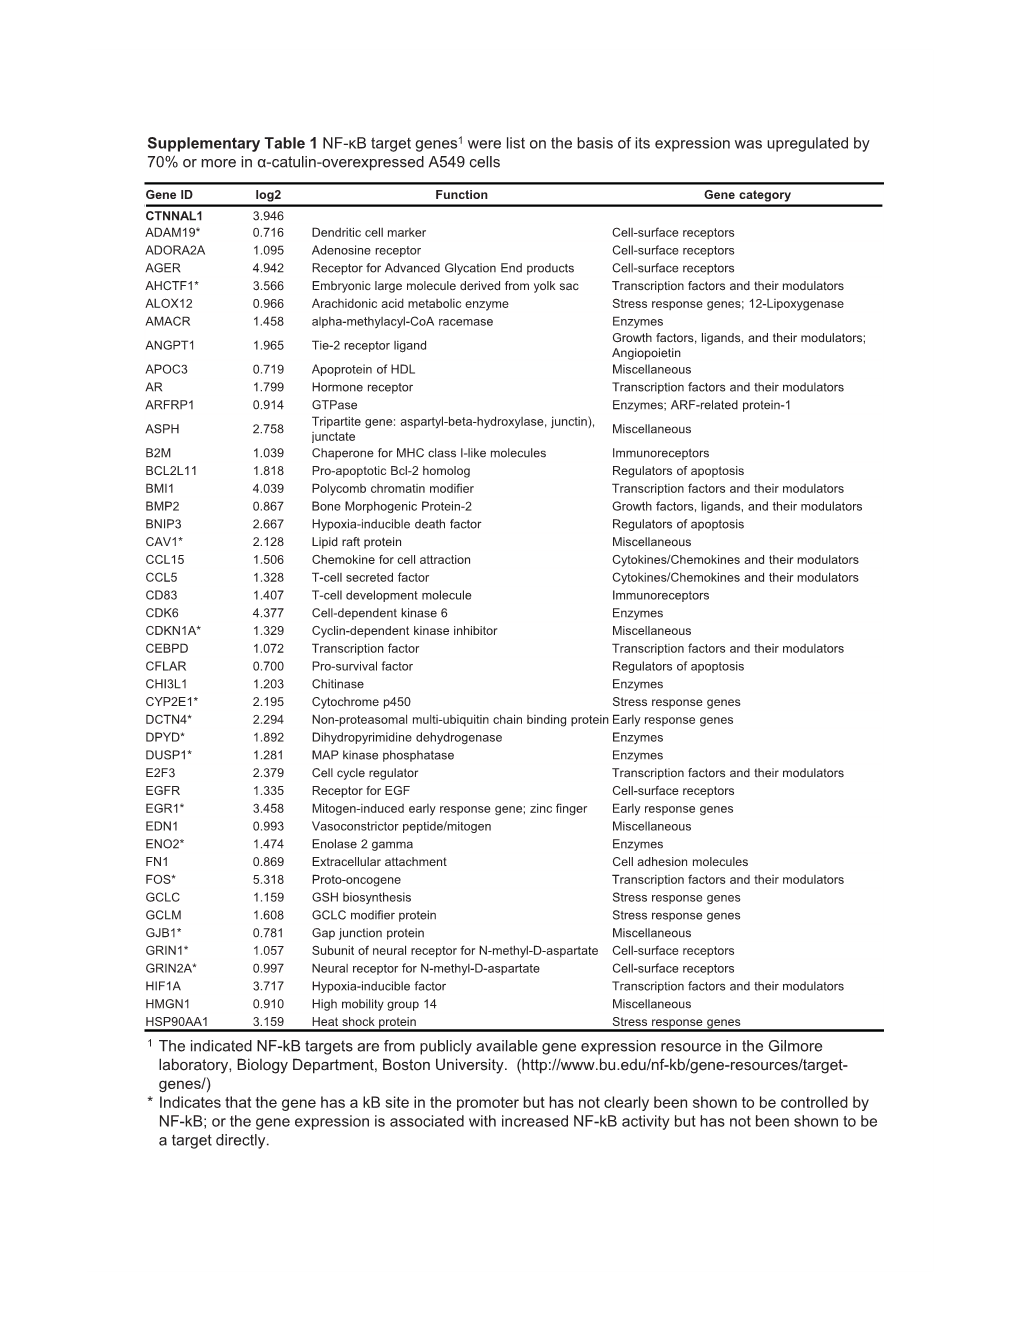 Supplementary Table 1 NF-�B Target Genes1 Were List on the Basis of Its Expression Was Upregulated by 70% Or More in �-Catulin-Overexpressed A549 Cells